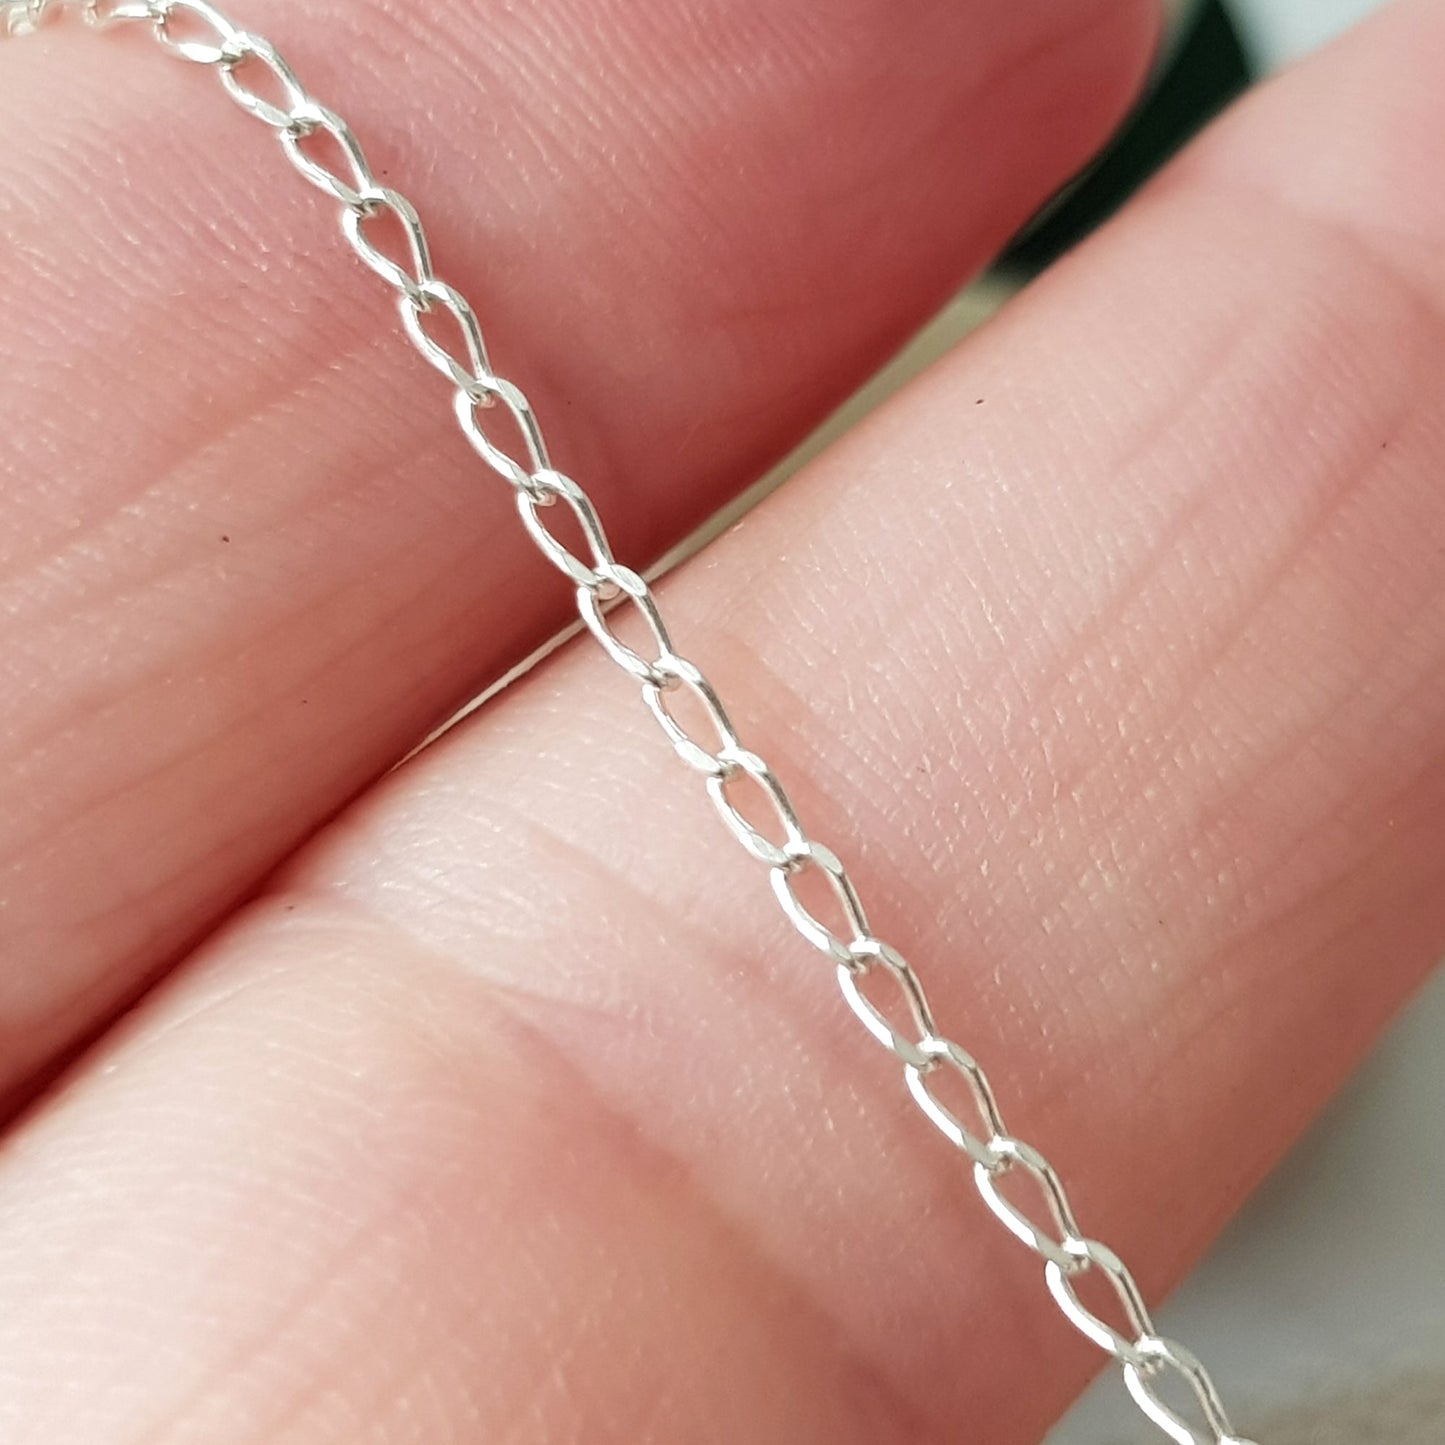 Chains - Long Curb Diamond Cut Chain Genuine Sterling Silver Finished | SS-FChainLCD | Jewellery Making Supply